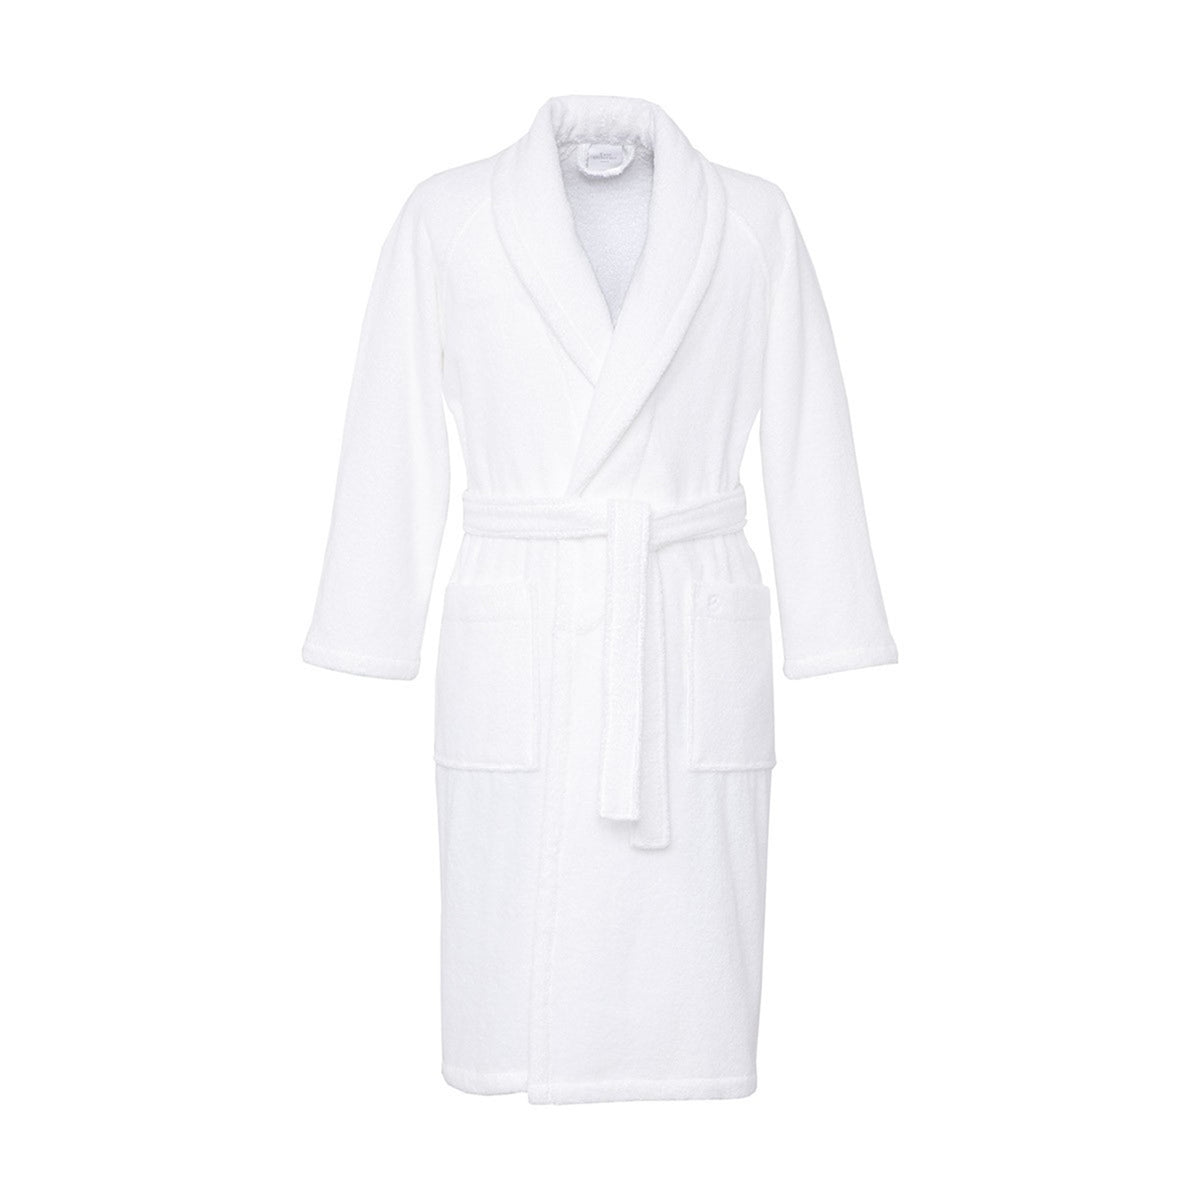 Front View of Yves Delorme Etoile Bath Robe in Blanc Color